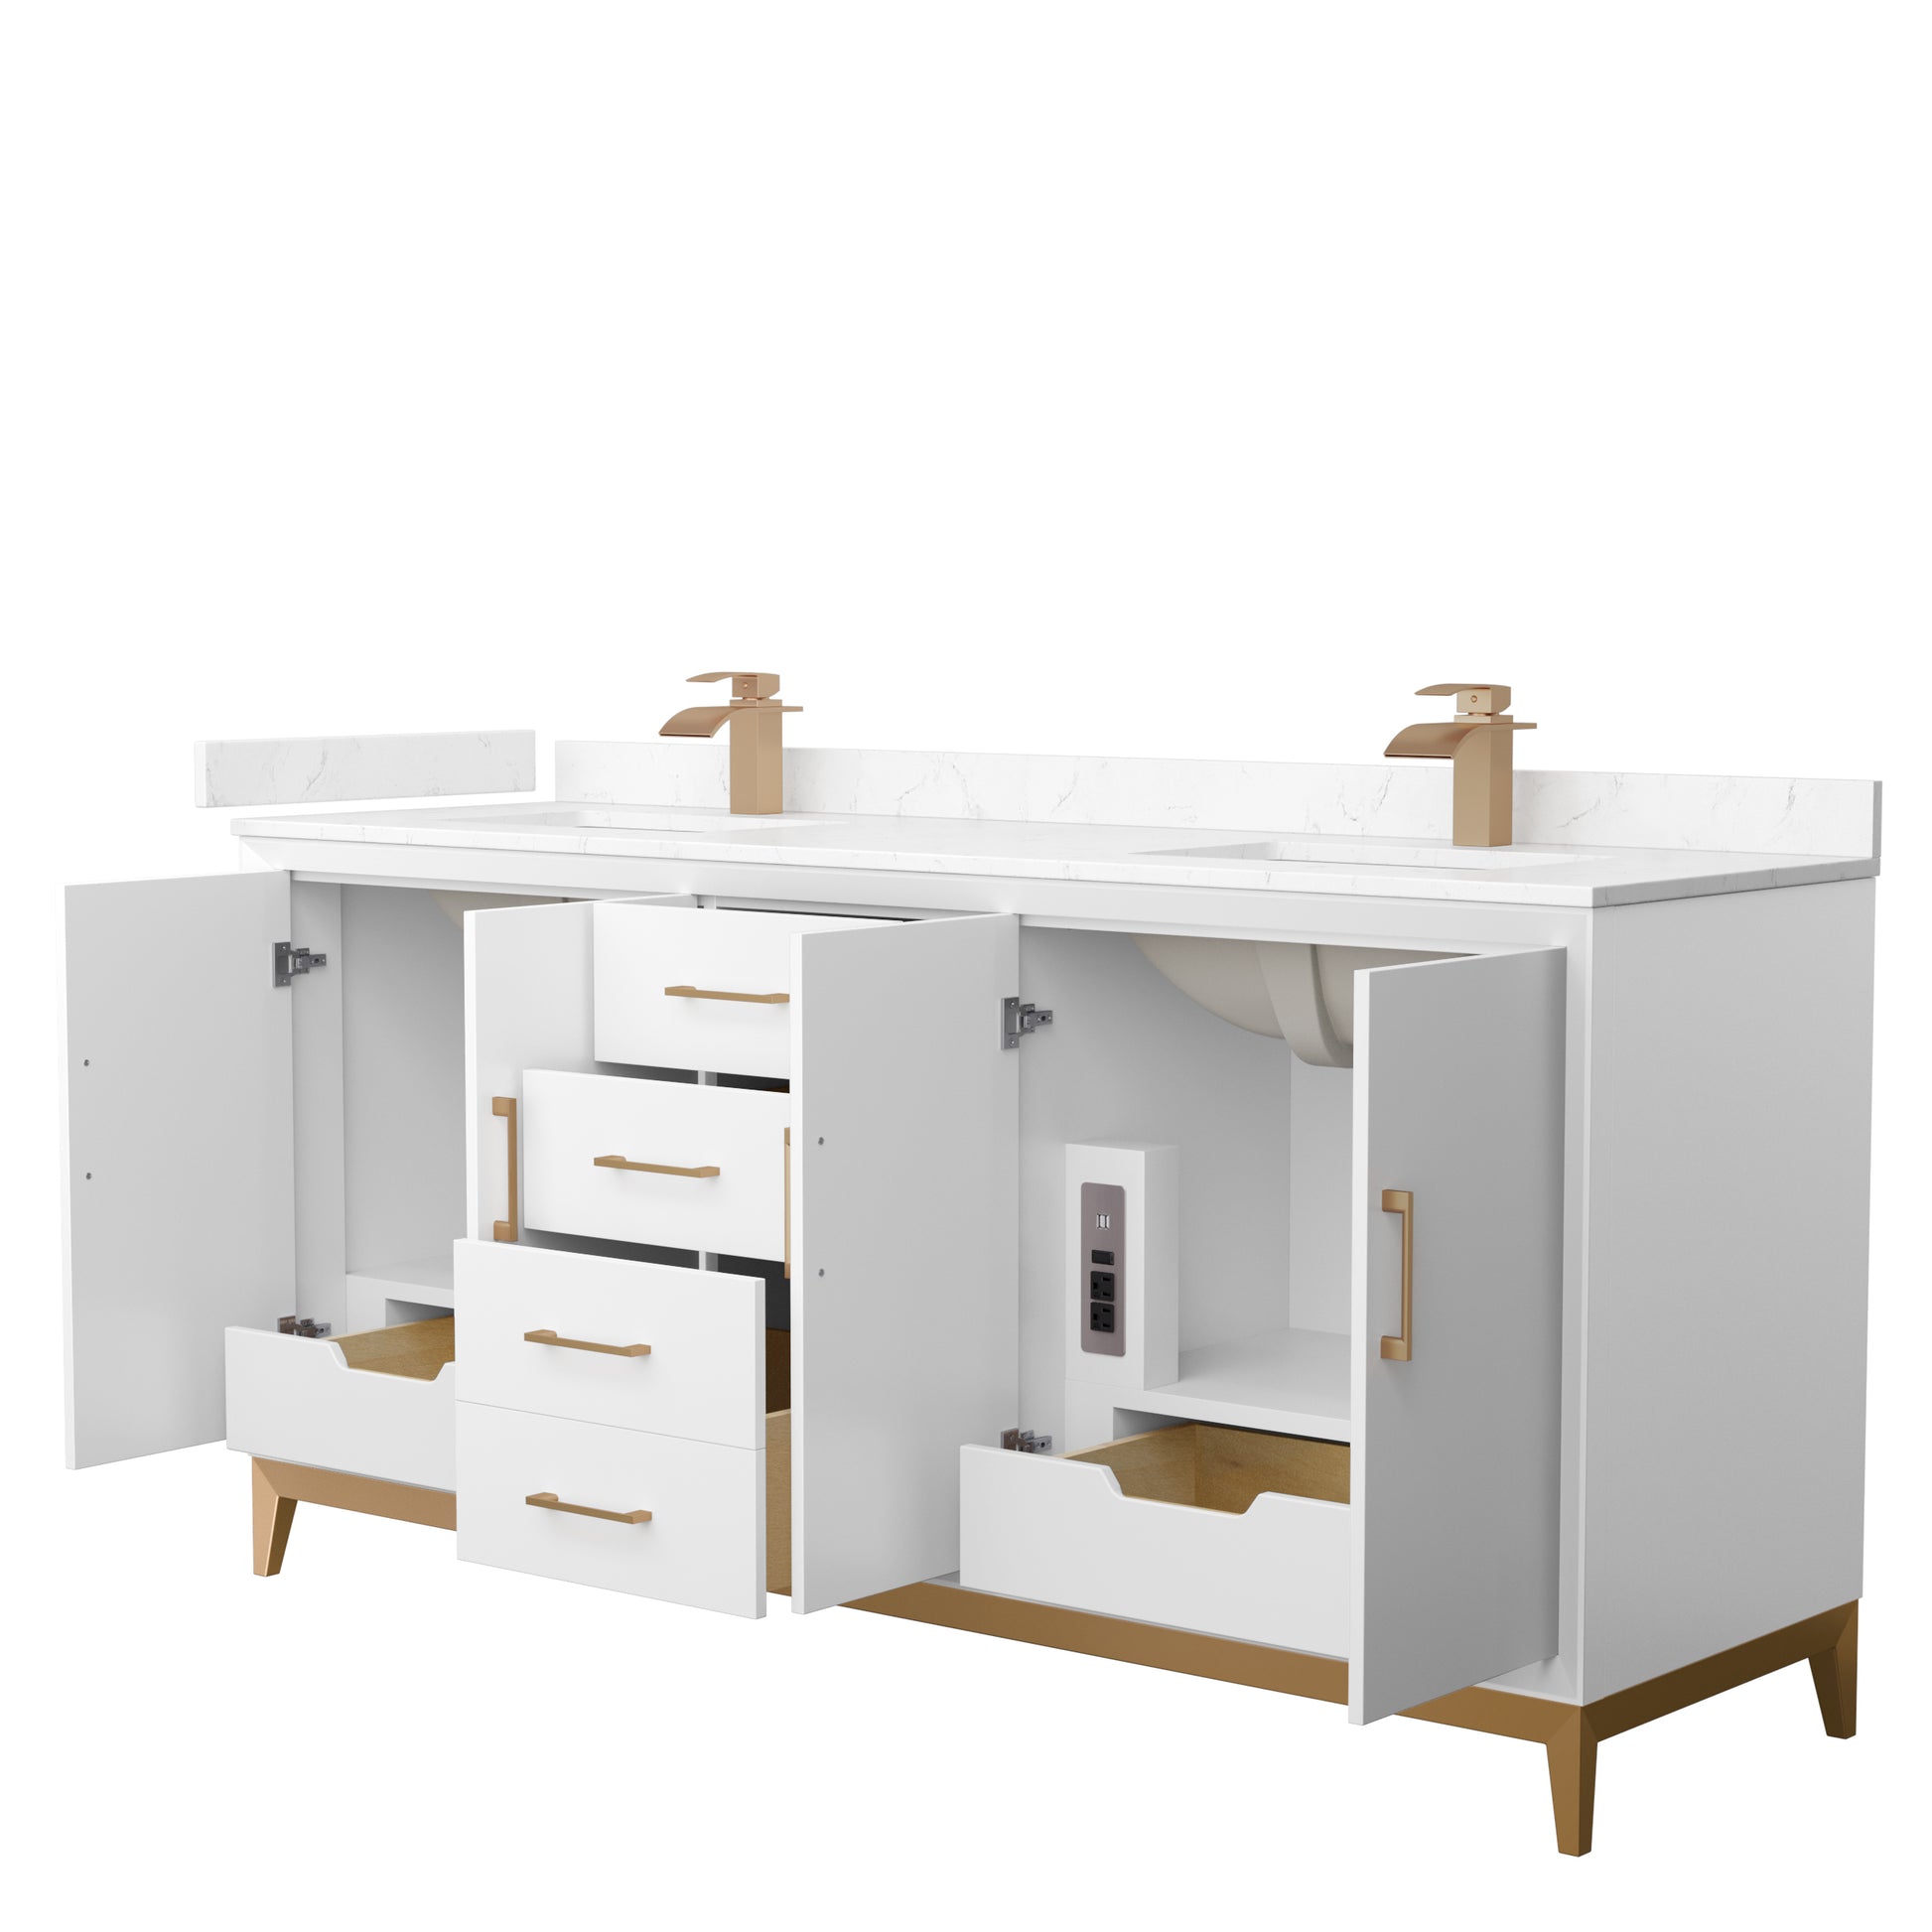 
  
  Amici 72" Double Bathroom Vanity in White, with Cultured Marble, Undermount Square Sink, Optional Trim
  
